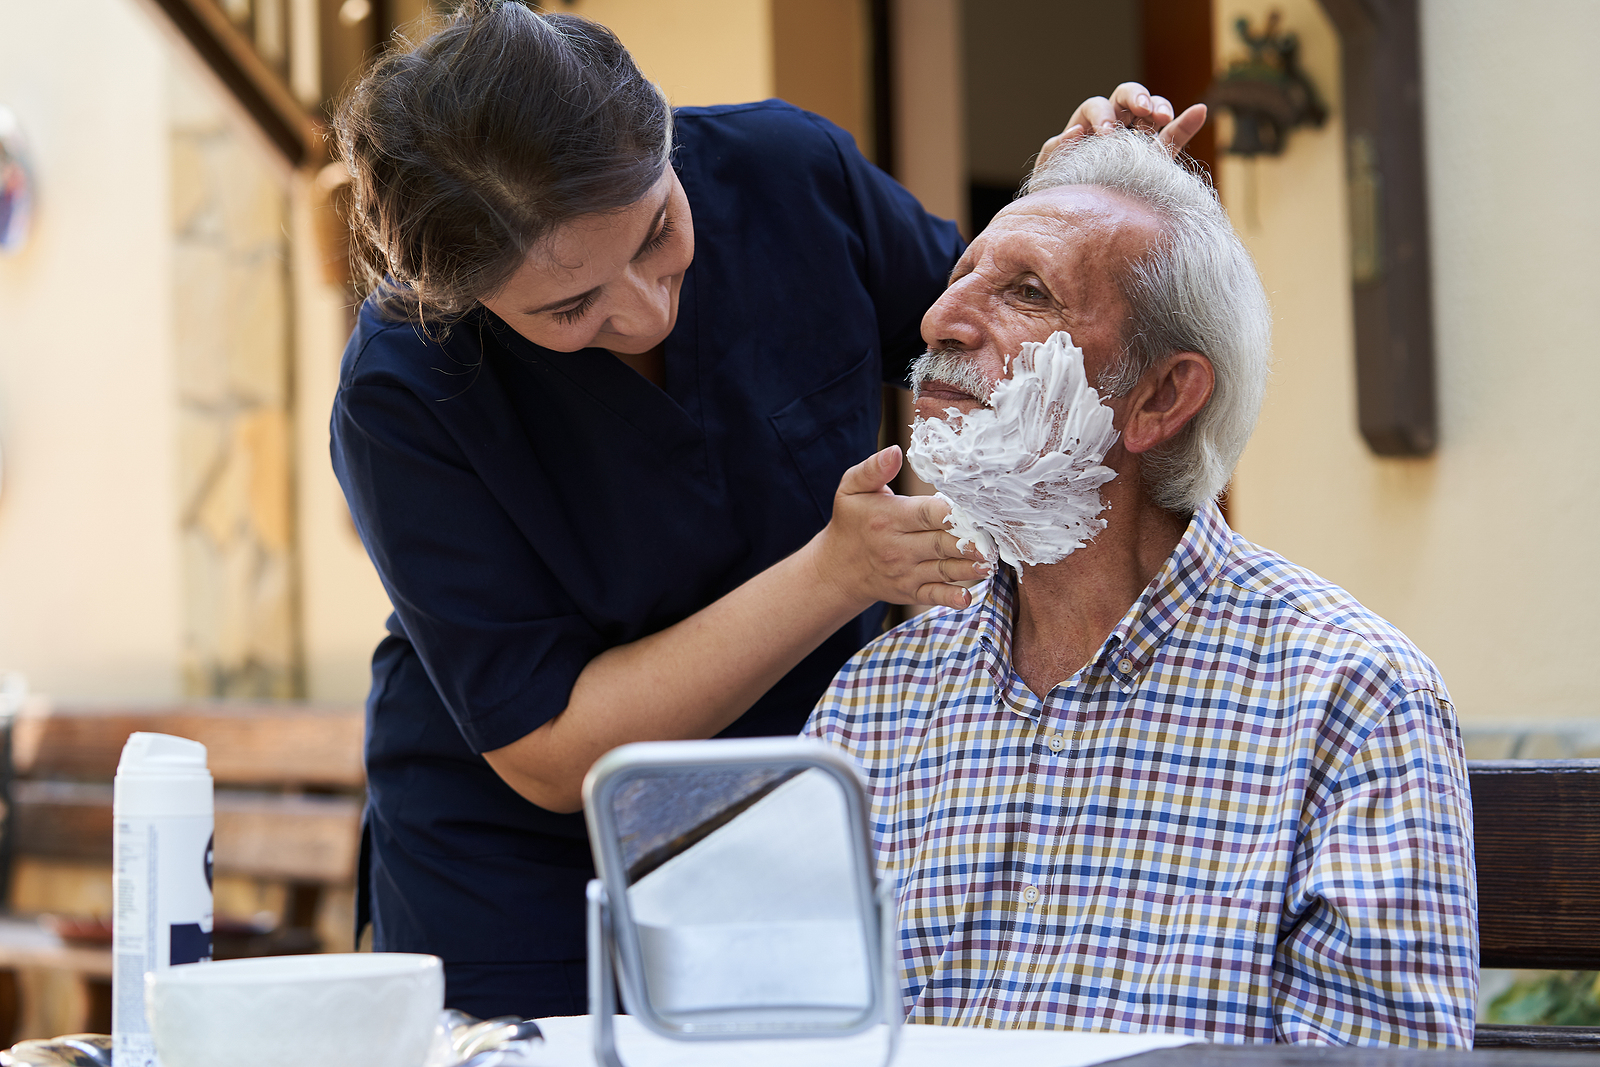 7 Reasons Personal Care at Home is Right for Your Senior